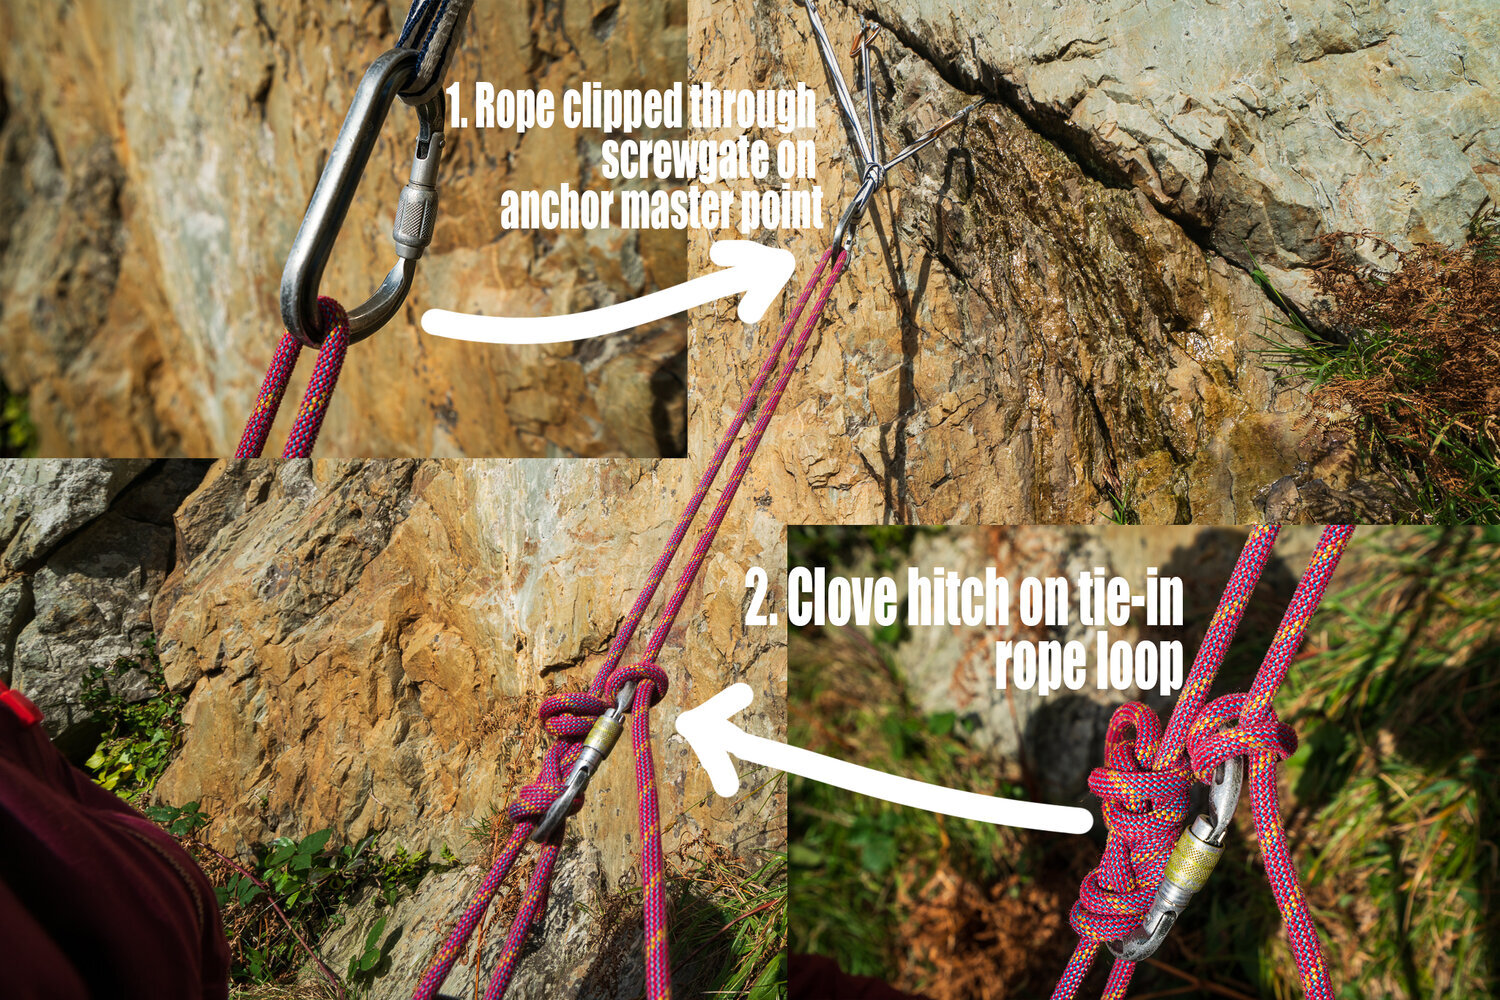 How to build trad anchors with the rope — Straight Up Adventures